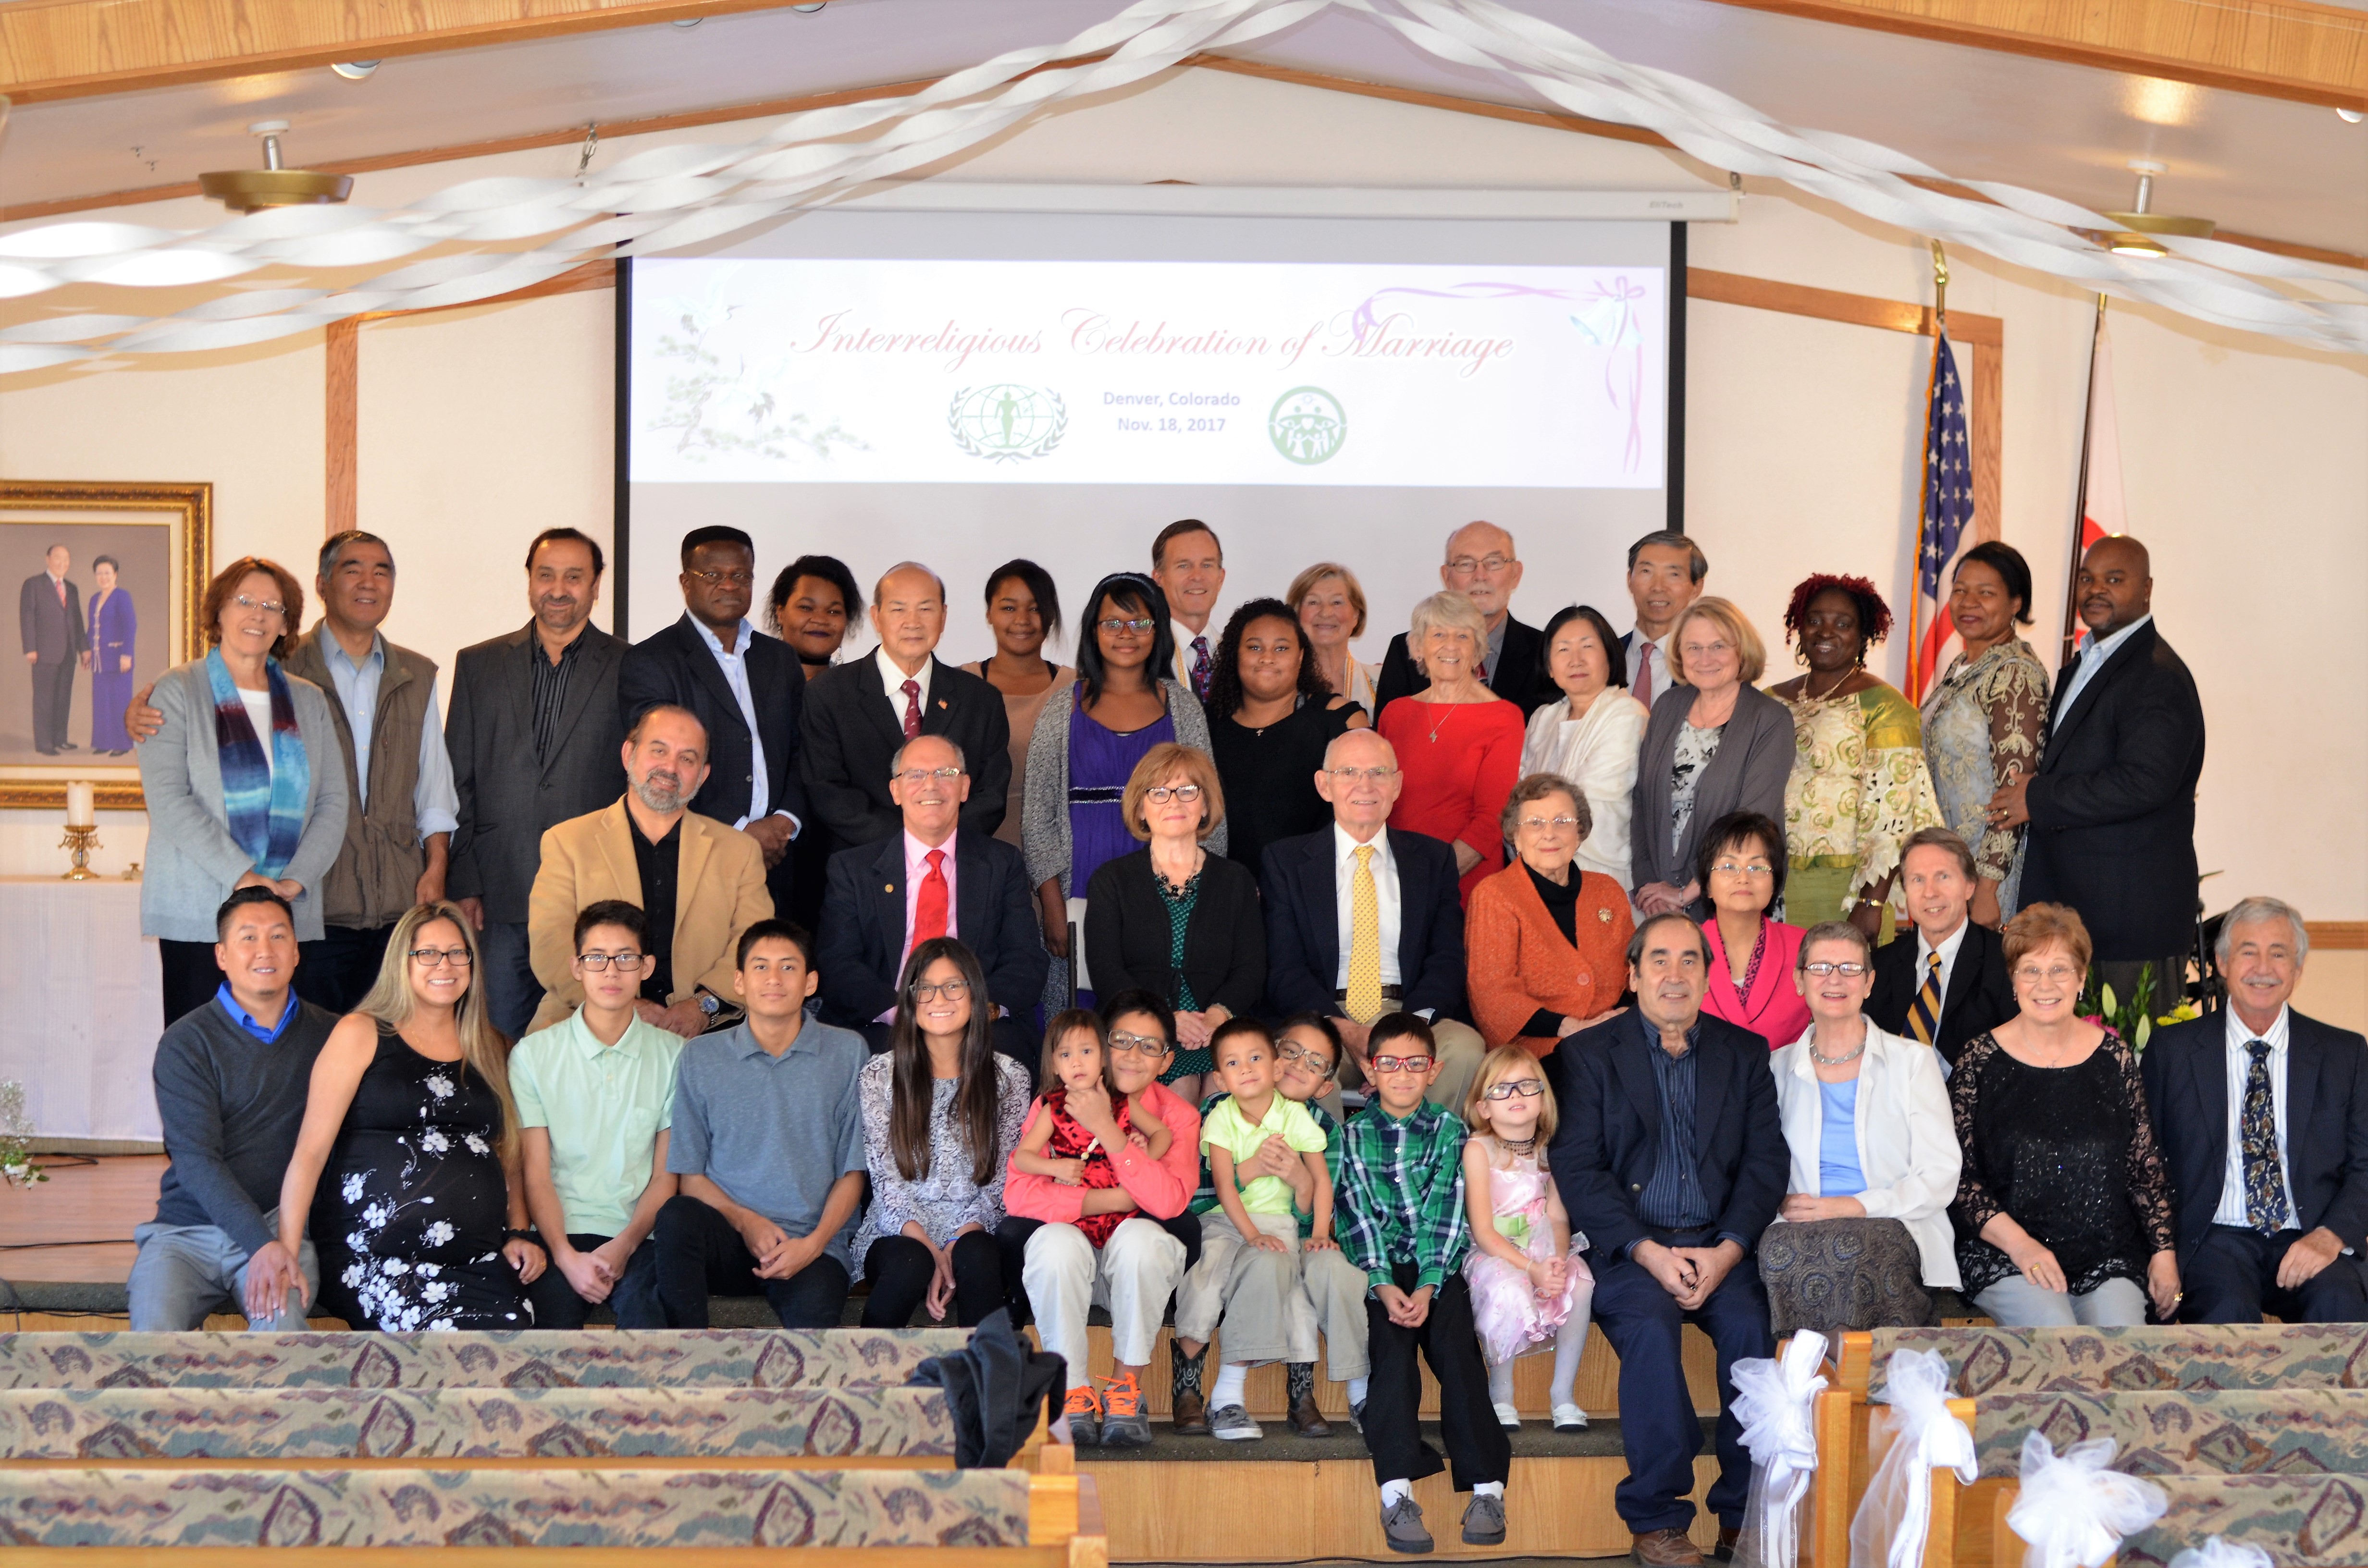 Group photo of the Interreligious Celebration of Marriage event in Denver